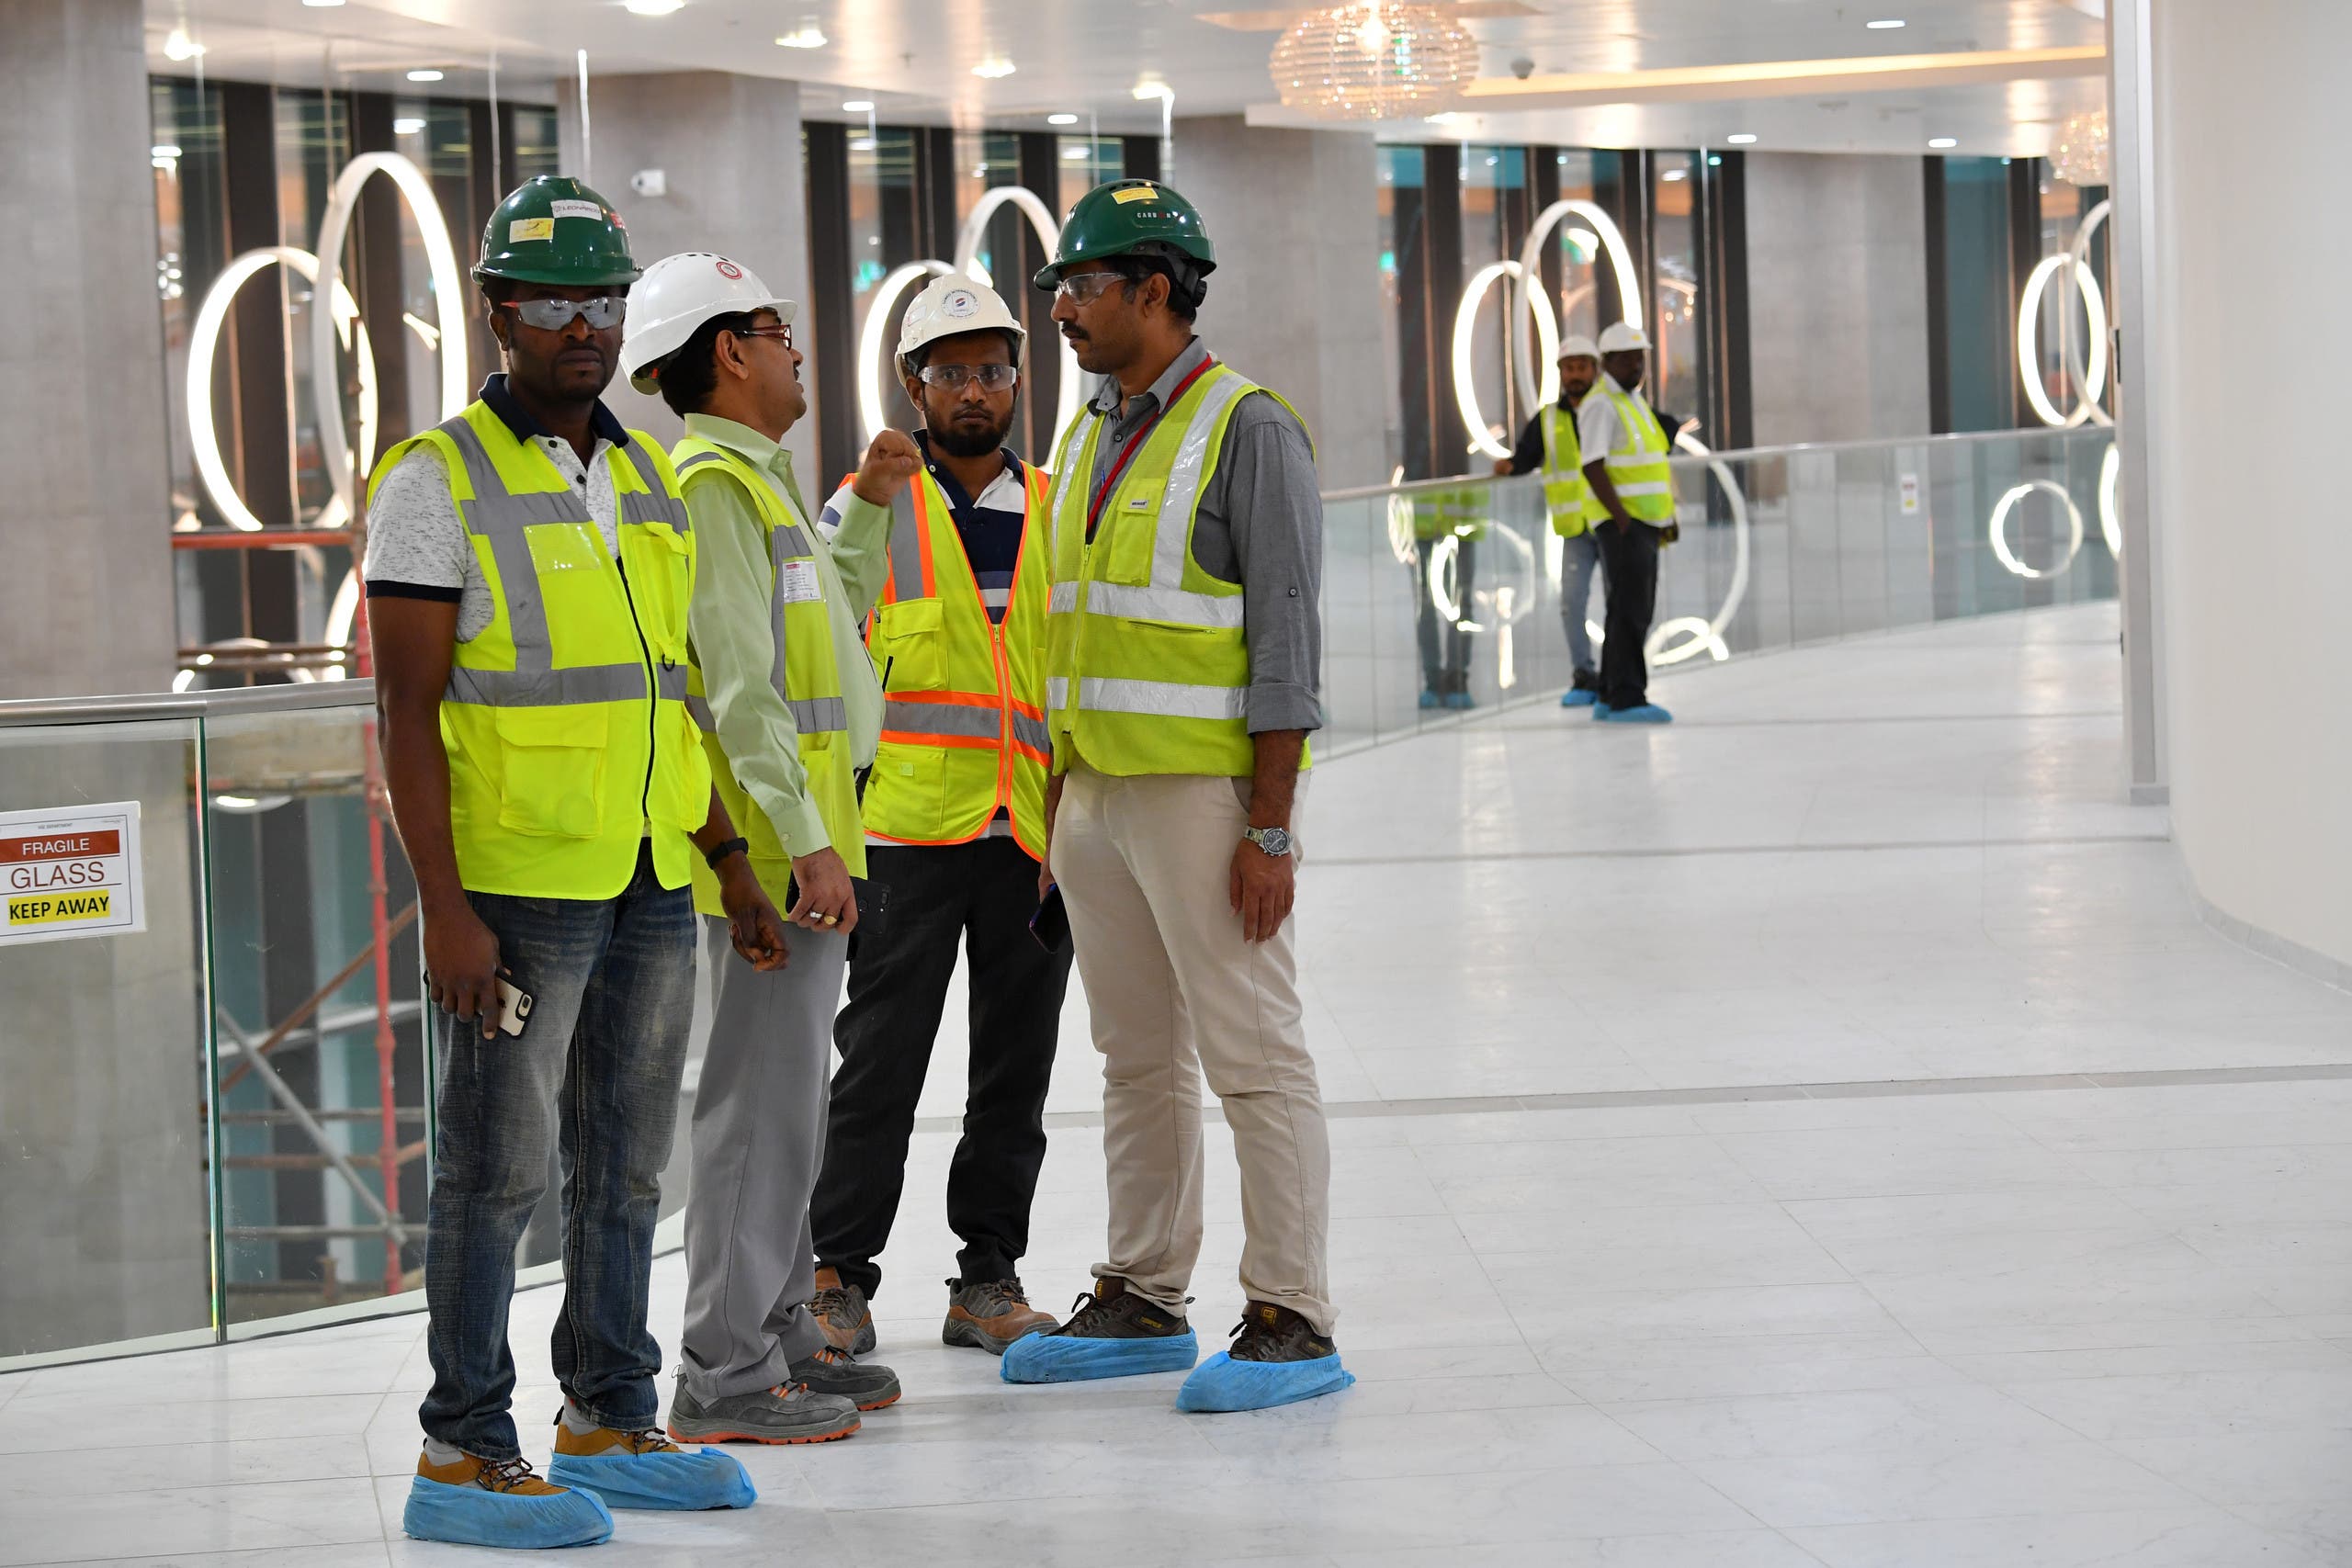 This picture taken on December 17, 2019 shows construction workers speaking together inside Qatar's new al-Bayt Stadium in the capital Doha, which will host matches of the FIFA football World Cup 2022. (AFP)